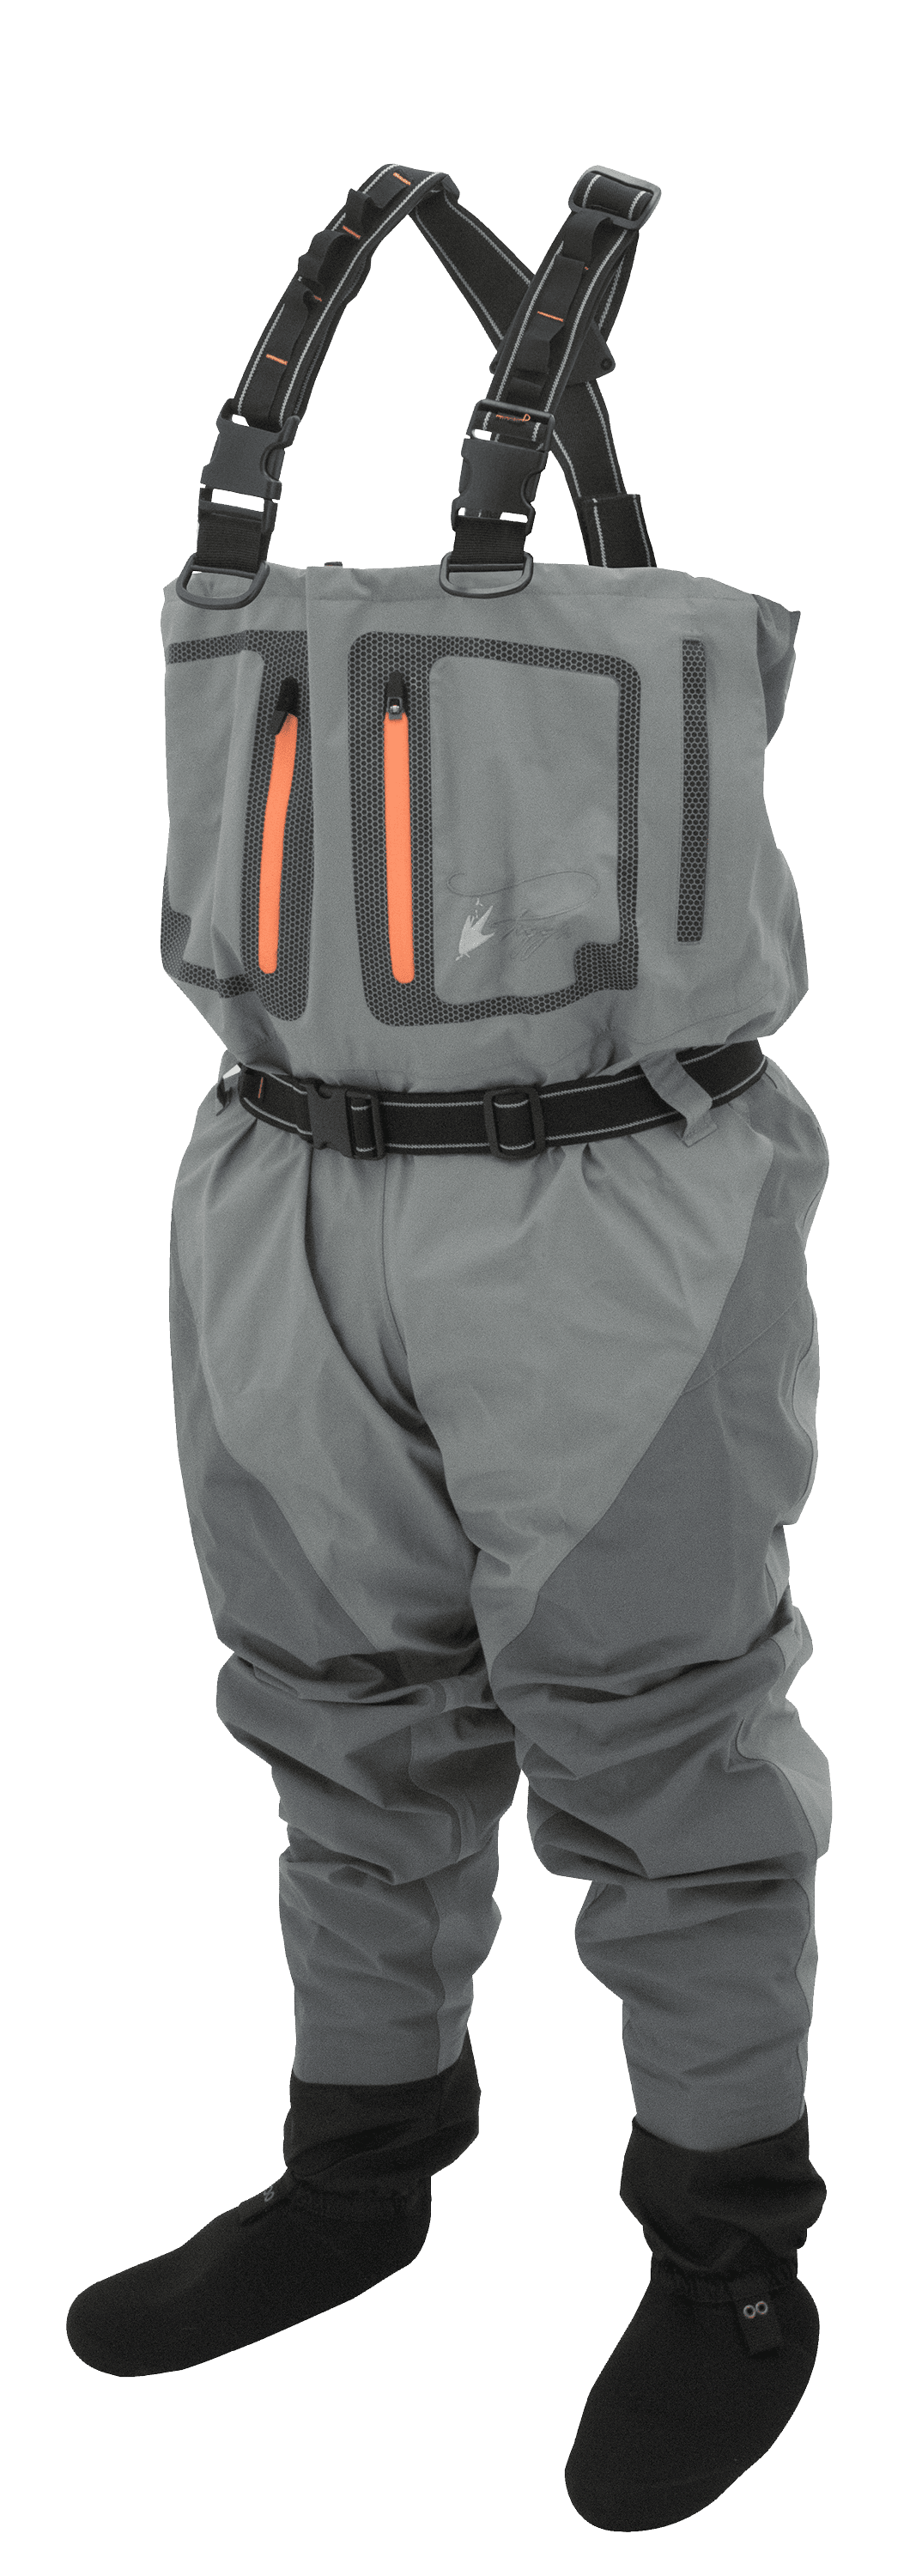 Frogg Toggs Rana II PVC Chest Waders Size 11 